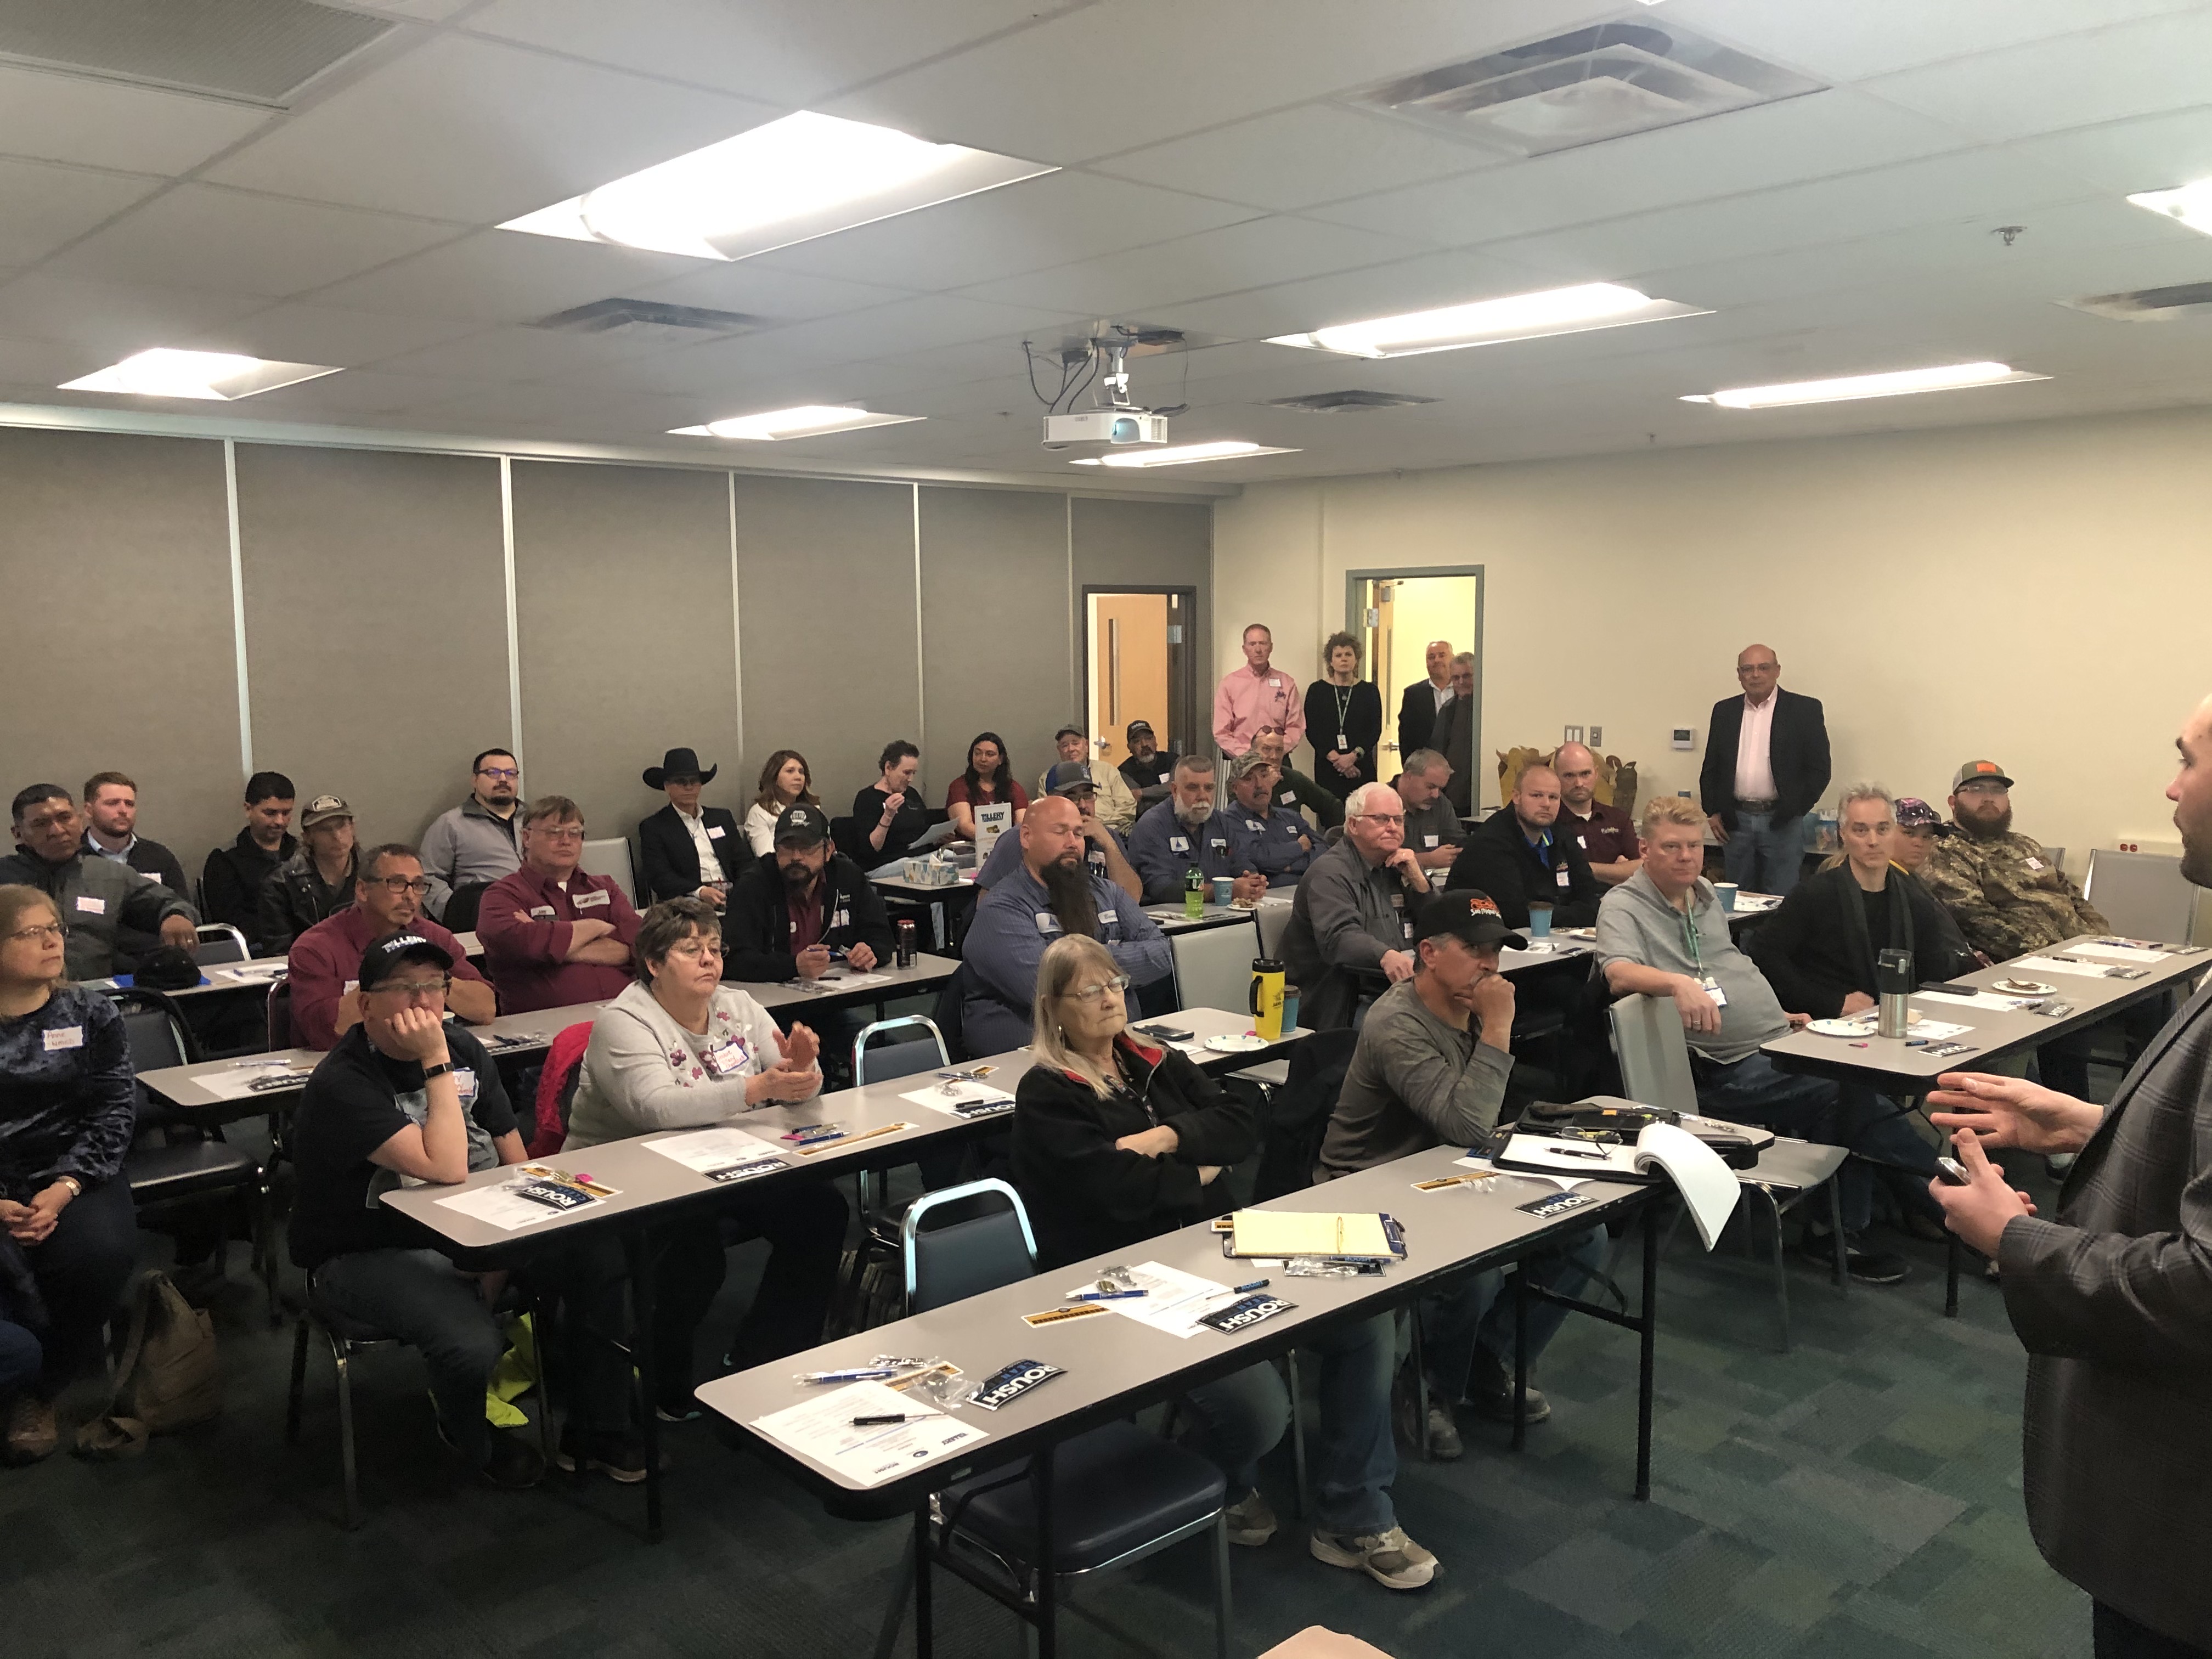 Propane school bus training in New Mexico as new autogas fleet rolls out to lower costs, pollution and noise from dirty diesel buses reports BPN the propane industry's leading source for news since 1939